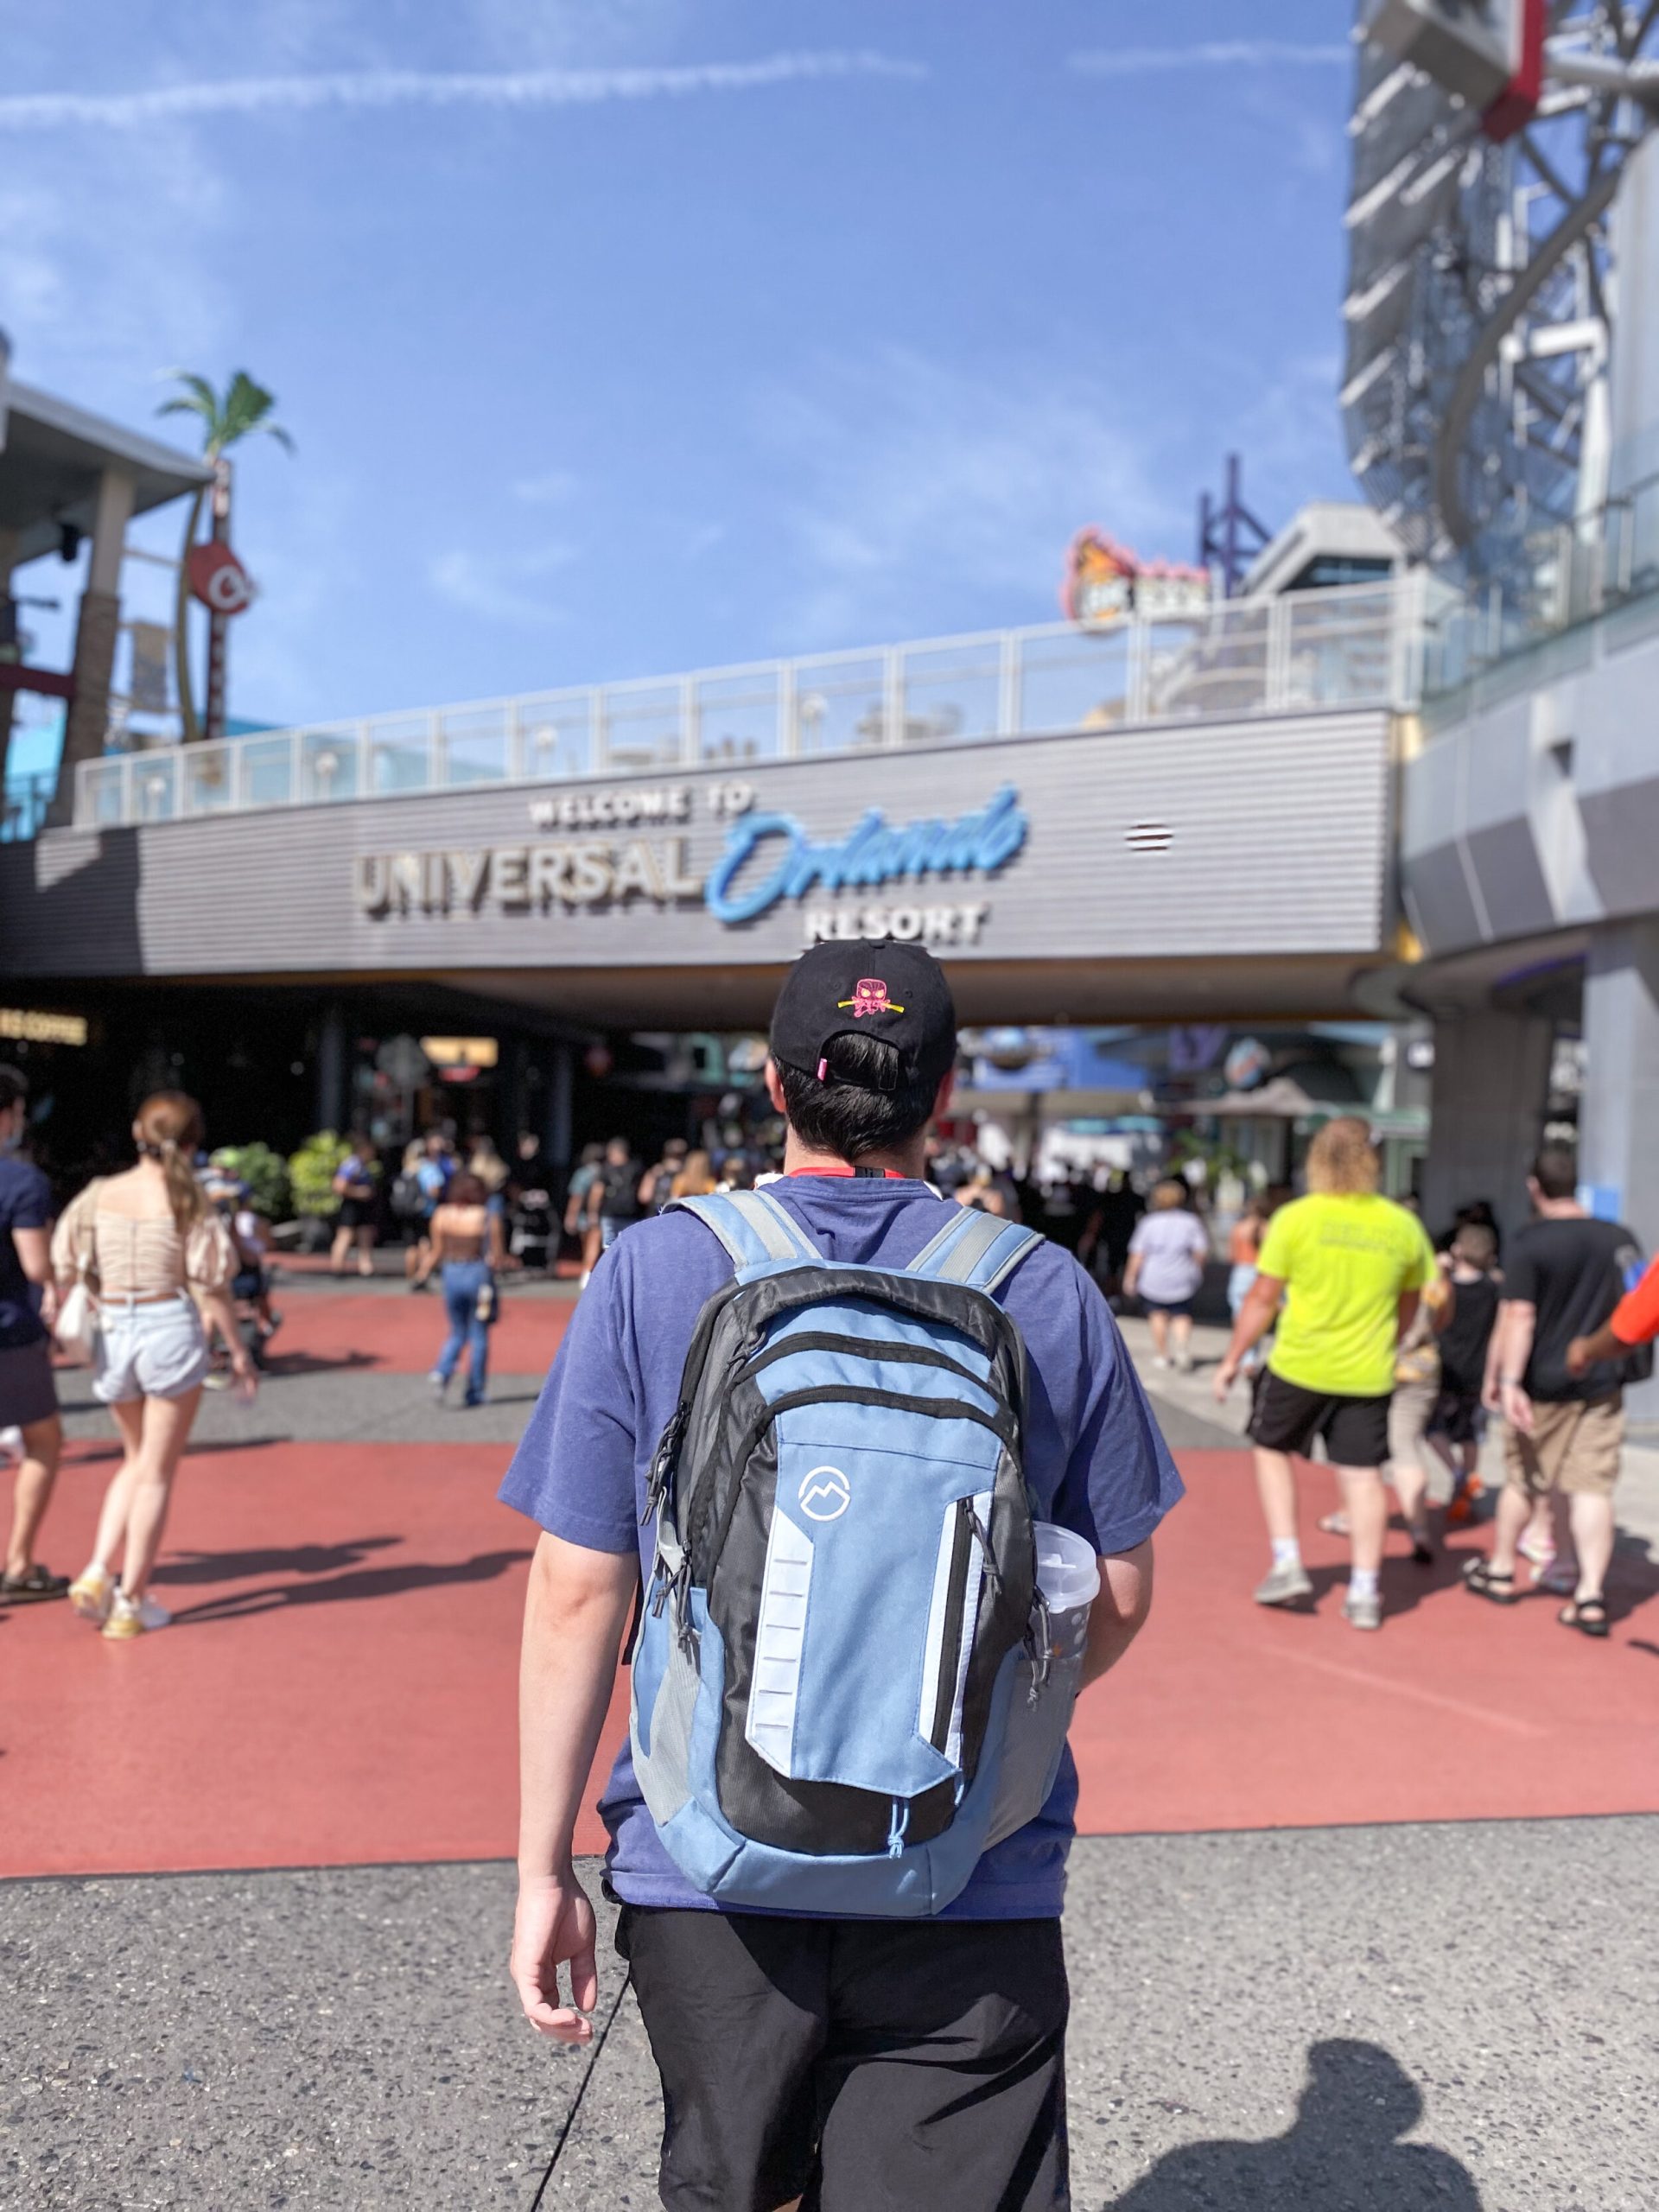 Can i bring a backpack to universal studios